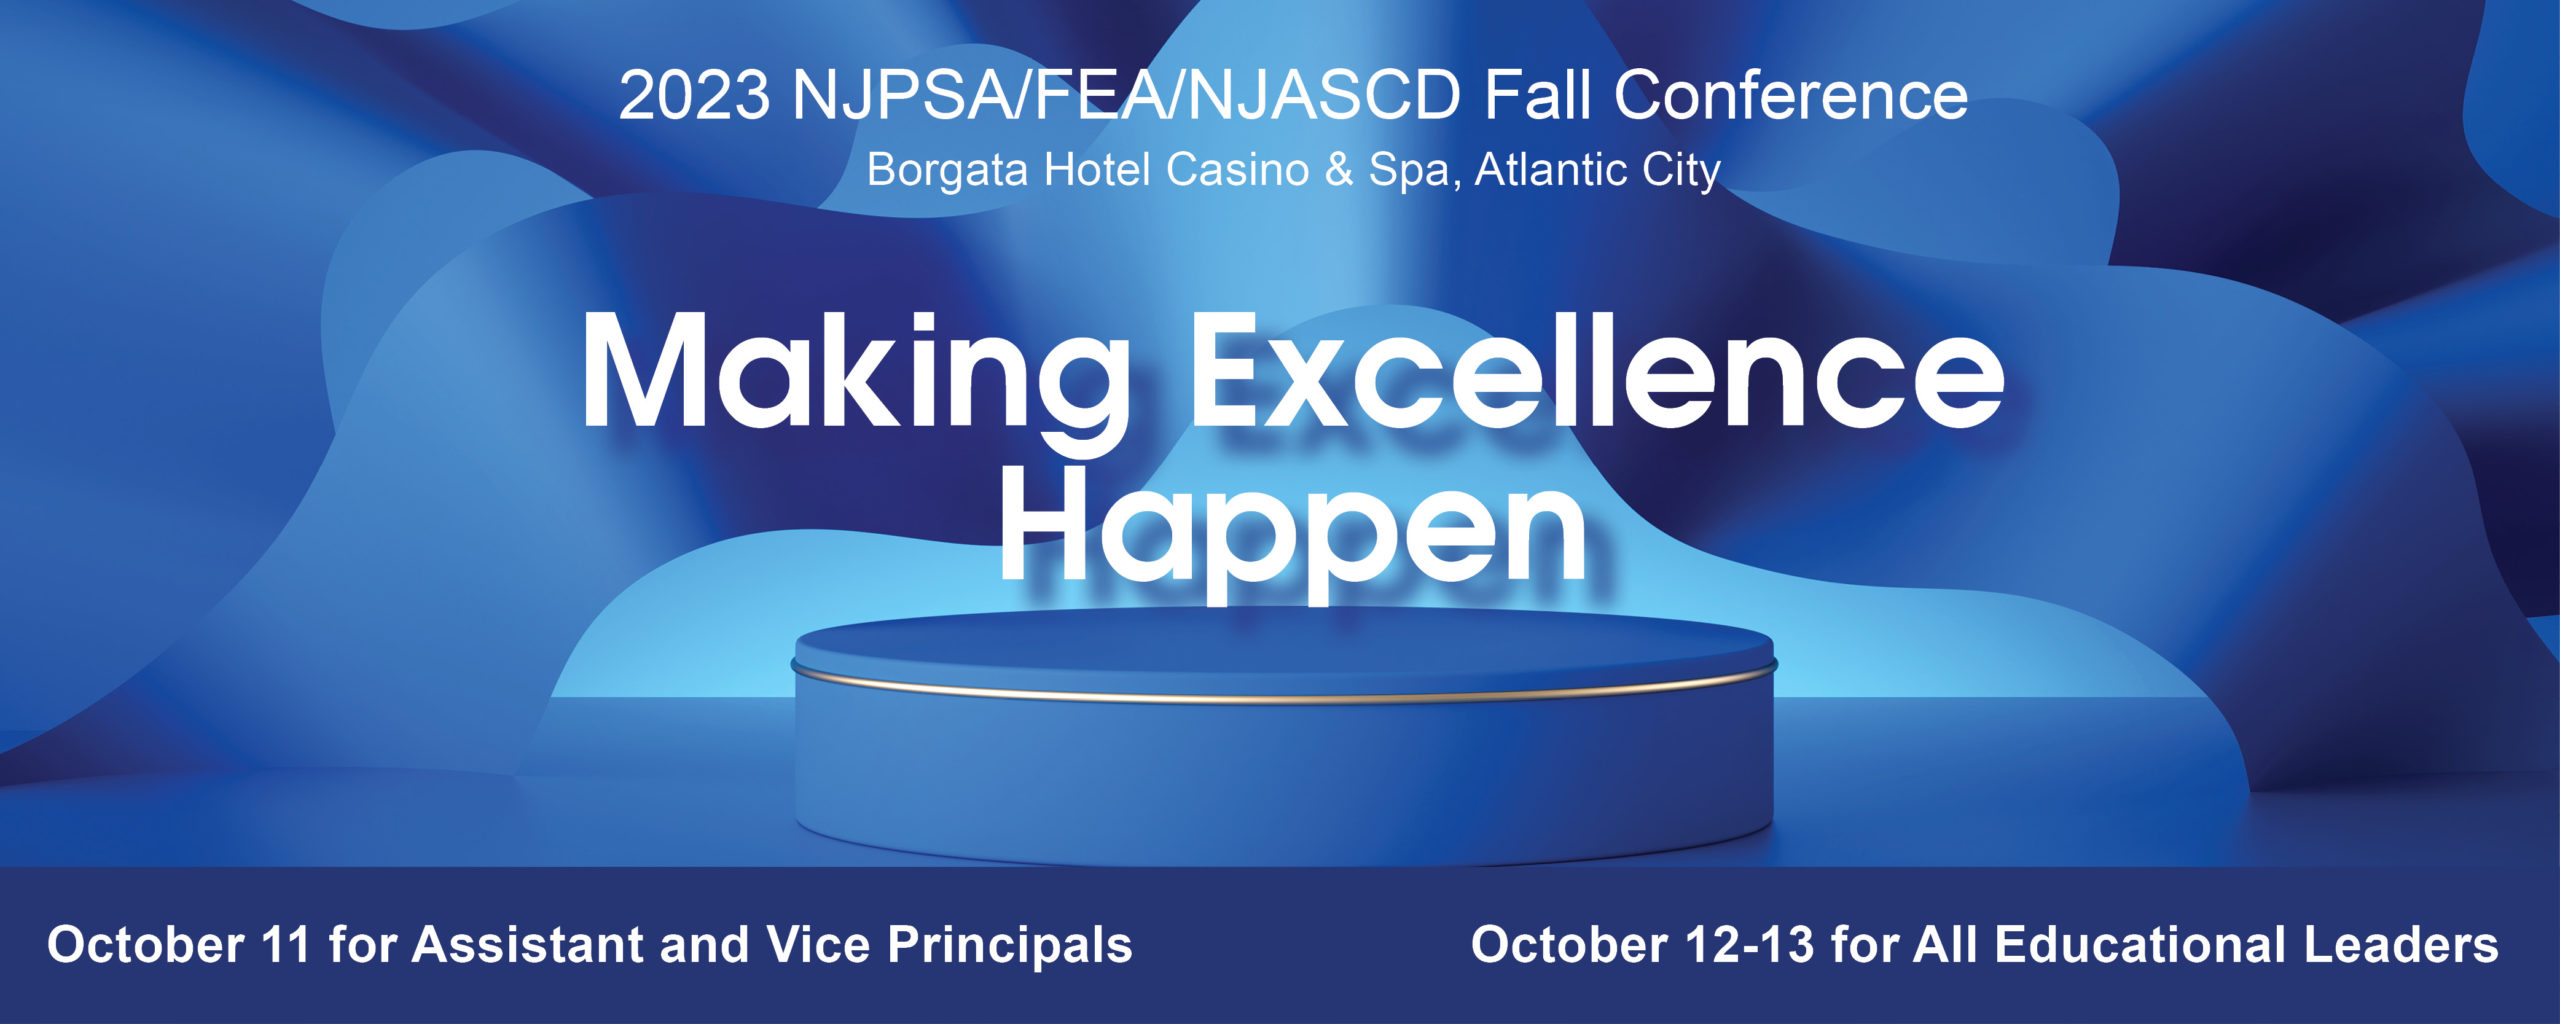 Register to attend or apply to present at the Fall Conference